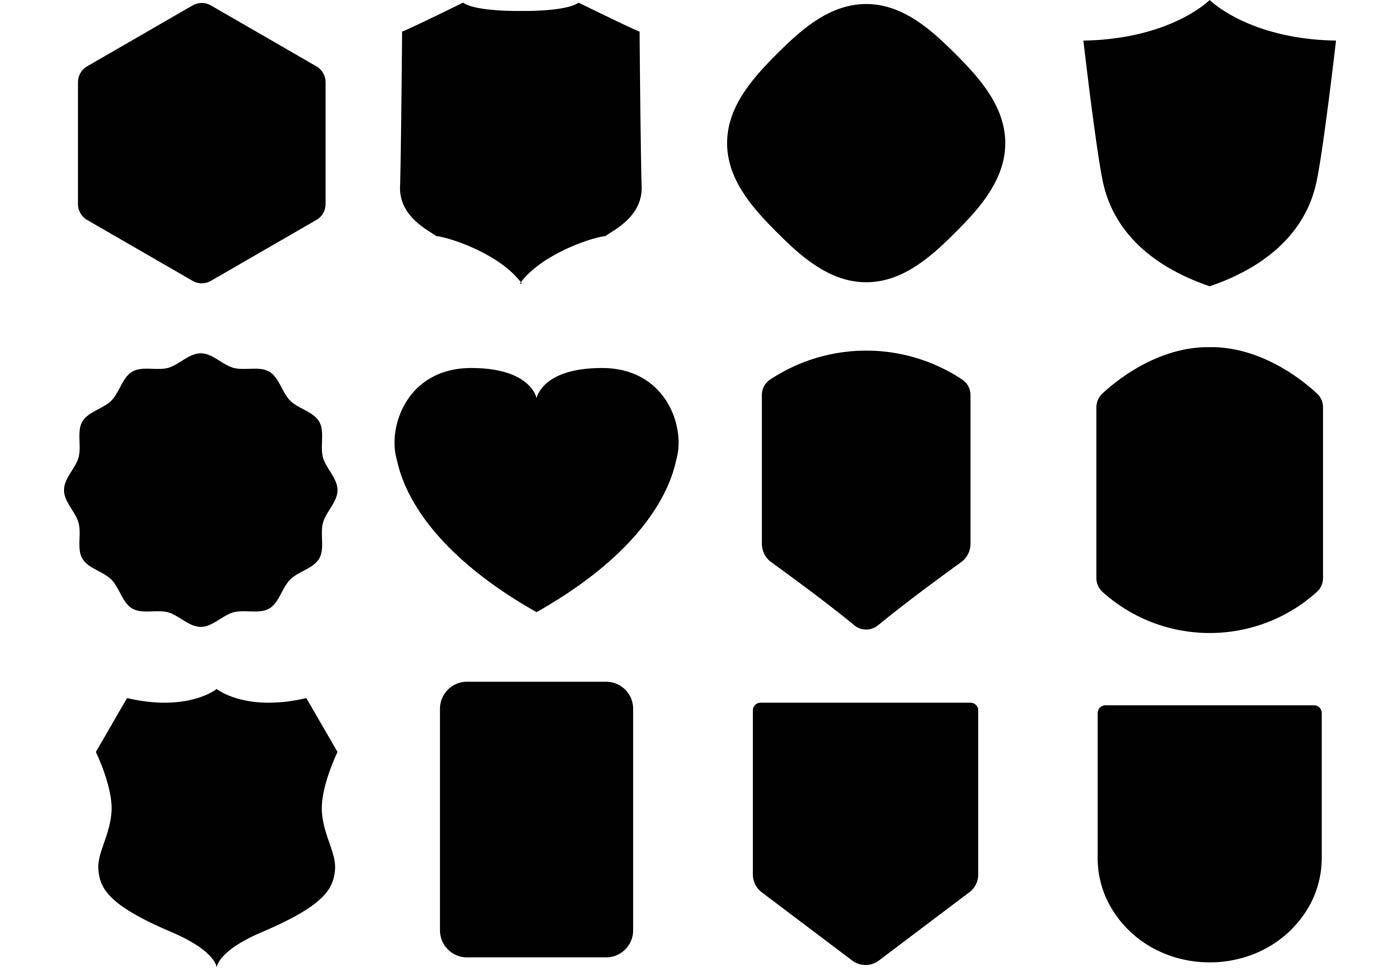 Free Vector Shield Shapes - (6960 Free Downloads)